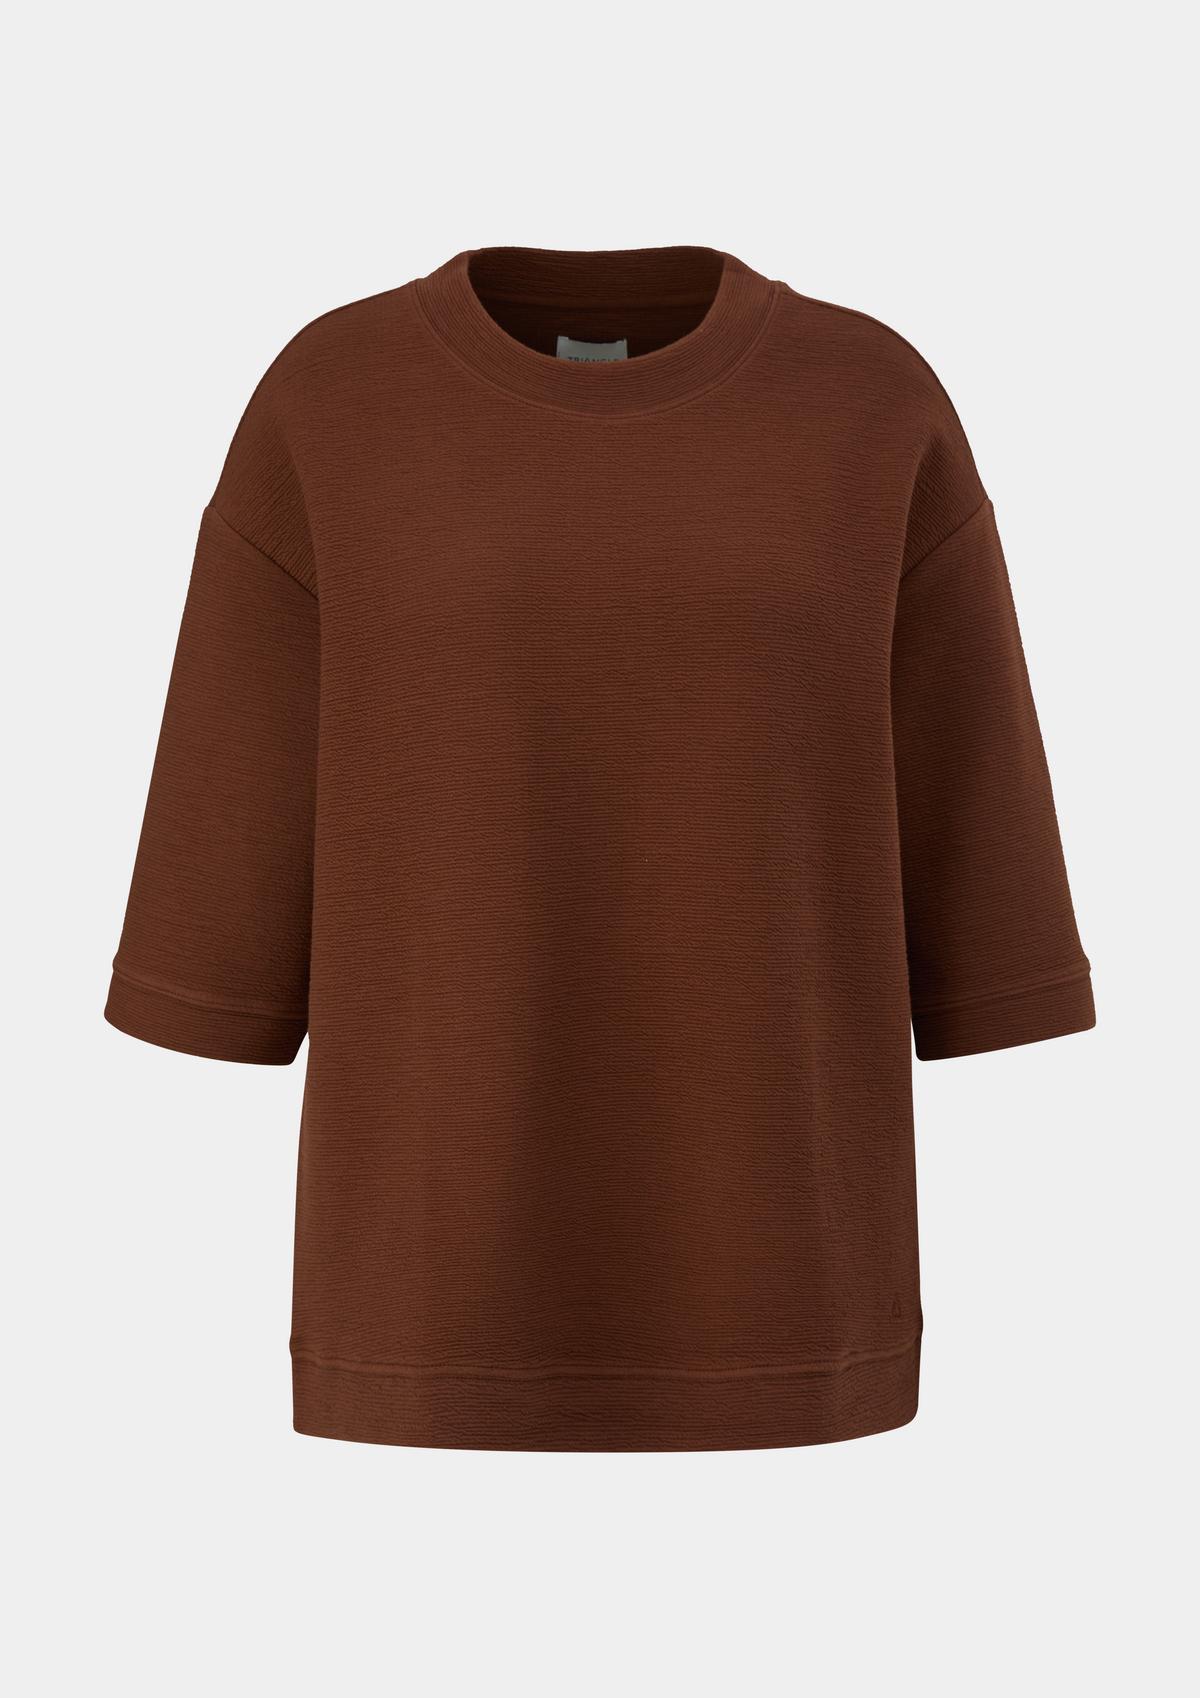 s.Oliver Sweatshirt with a crinkled texture